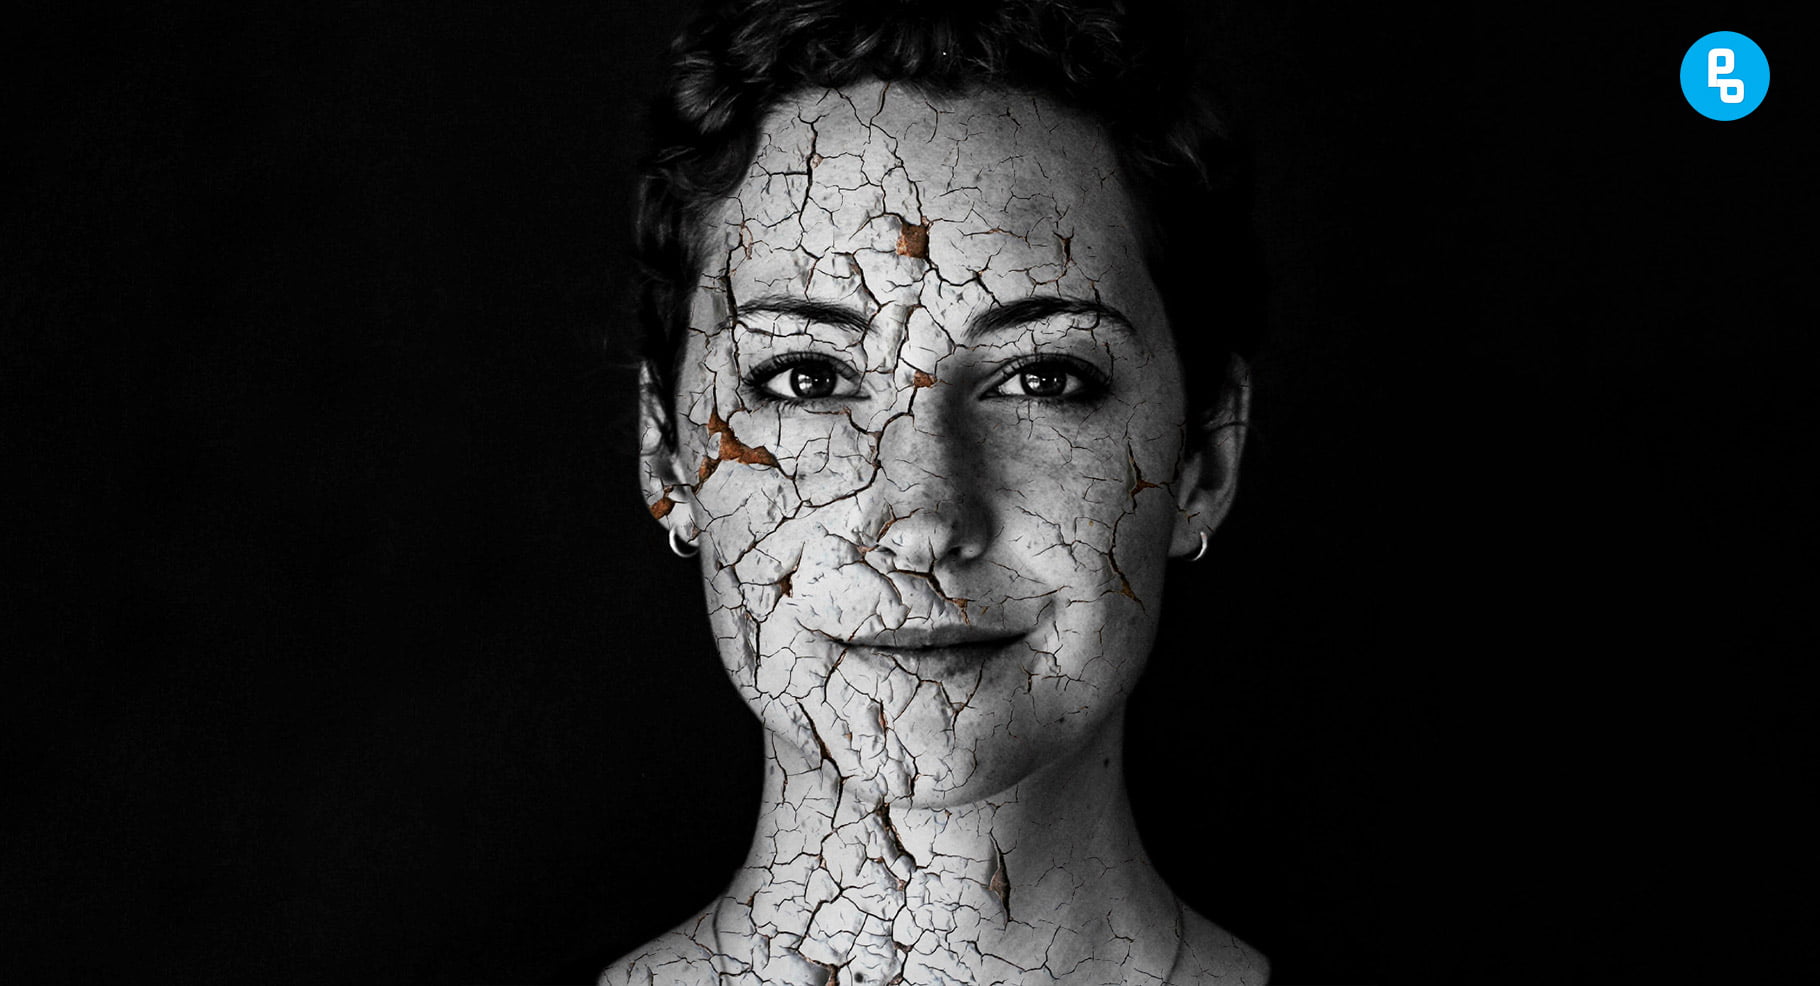 Cracked Skin effect in Photoshop